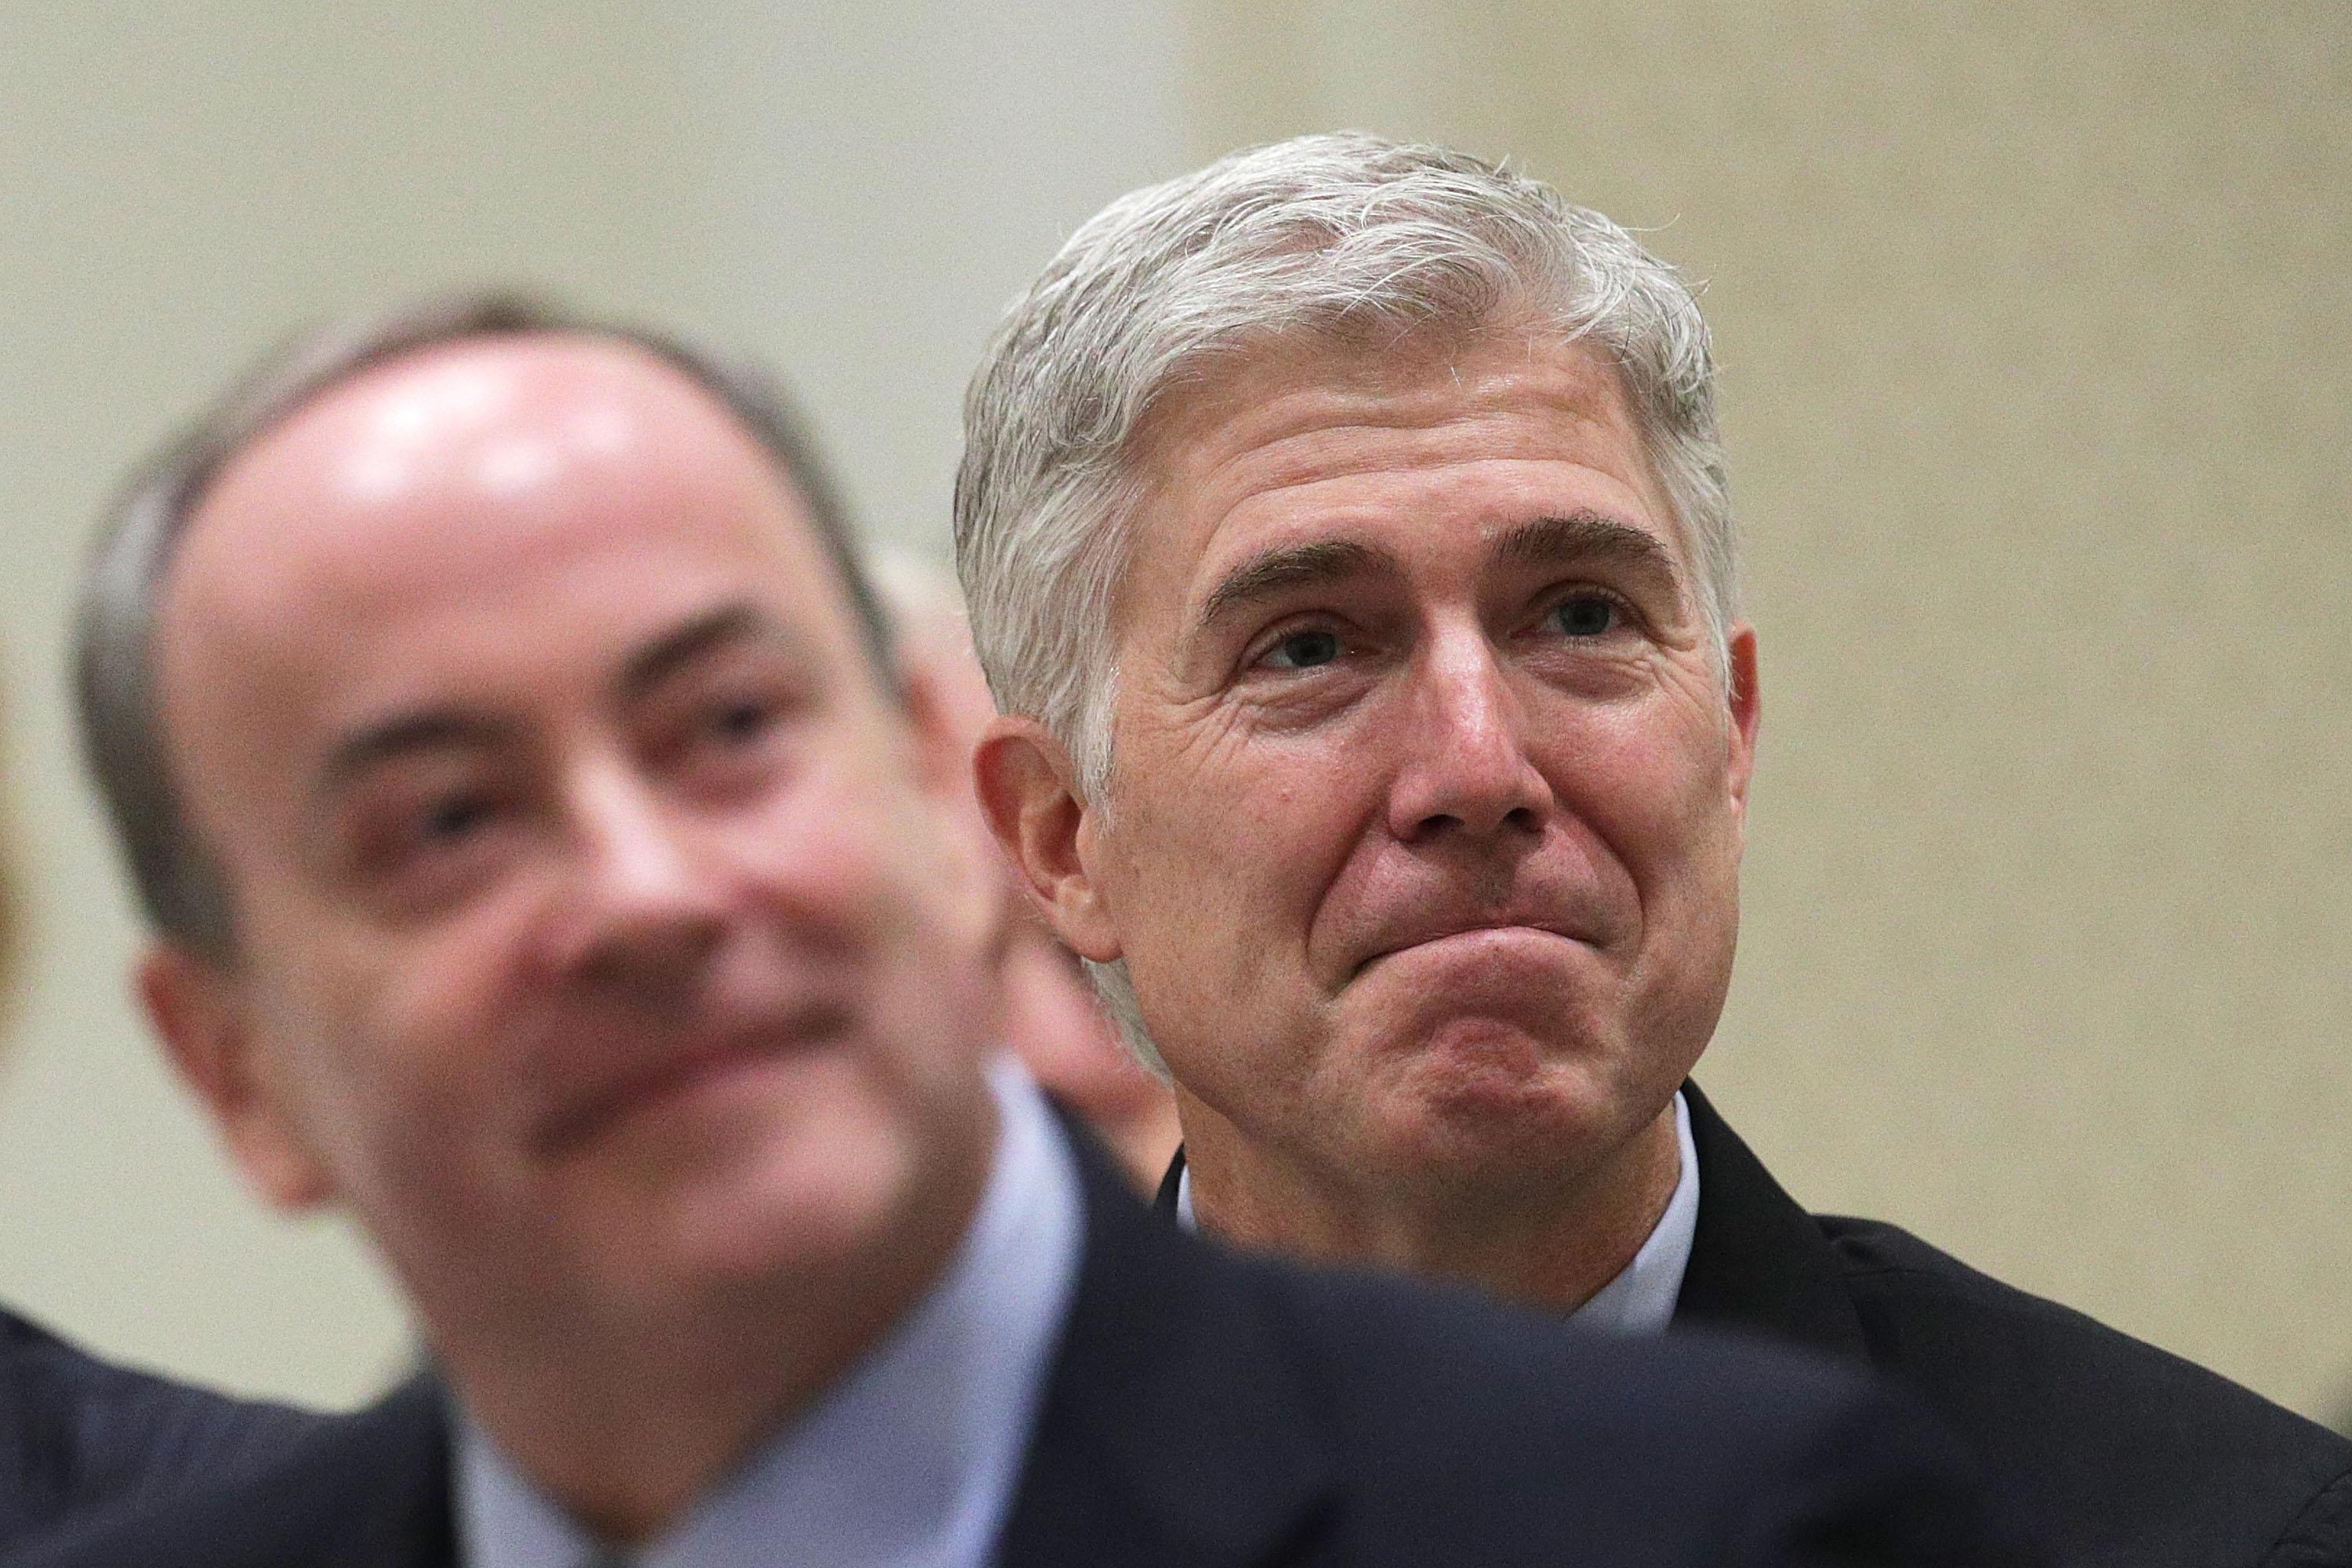 WASHINGTON, DC - SEPTEMBER 28:  U.S. Supreme Court Justice Neal Gorsuch (R) and Clint Bolick (L), associate justice of the Arizona Supreme Court listen during an event hosted by The Fund for American Studies September 28, 2017 at Trump International Hotel in Washington, DC. Justice Gorsuch gave keynote speech at the event that celebrate the 50th anniversary of the organization.  (Photo by Alex Wong/Getty Images)